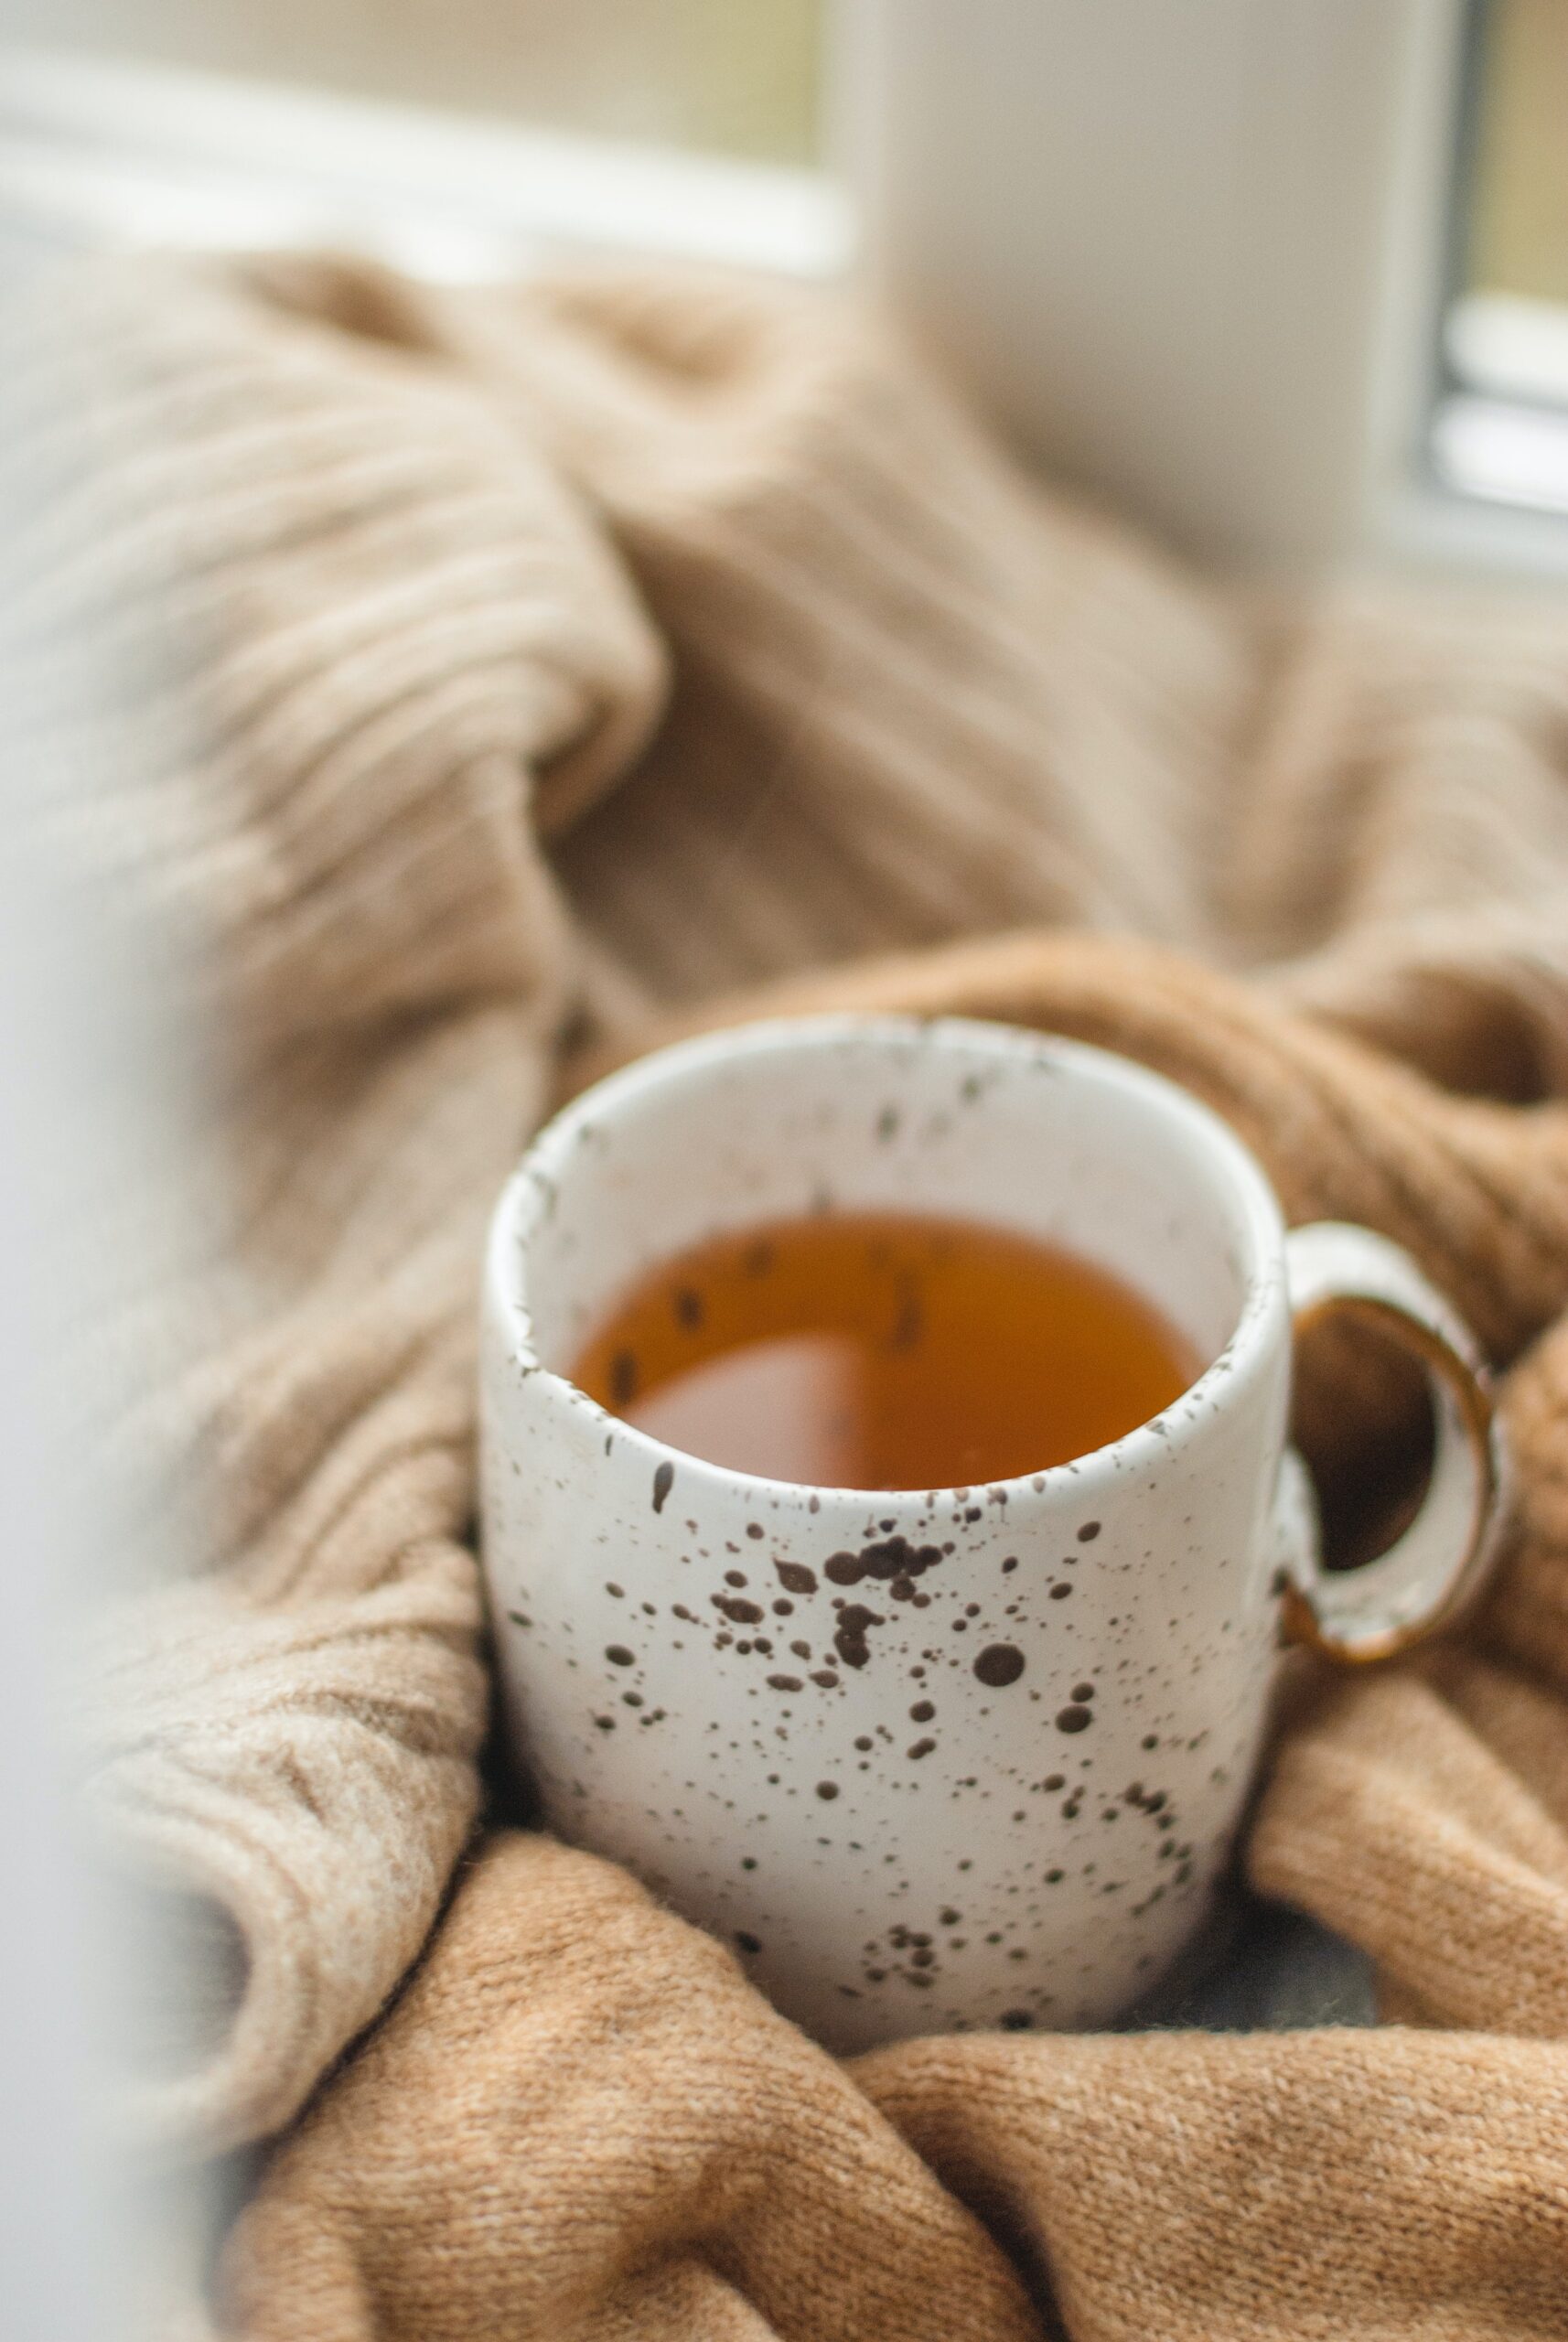 A white and black speckled mug of tea sits on a windowsill with a tan throw blanket – herbal tea recipes